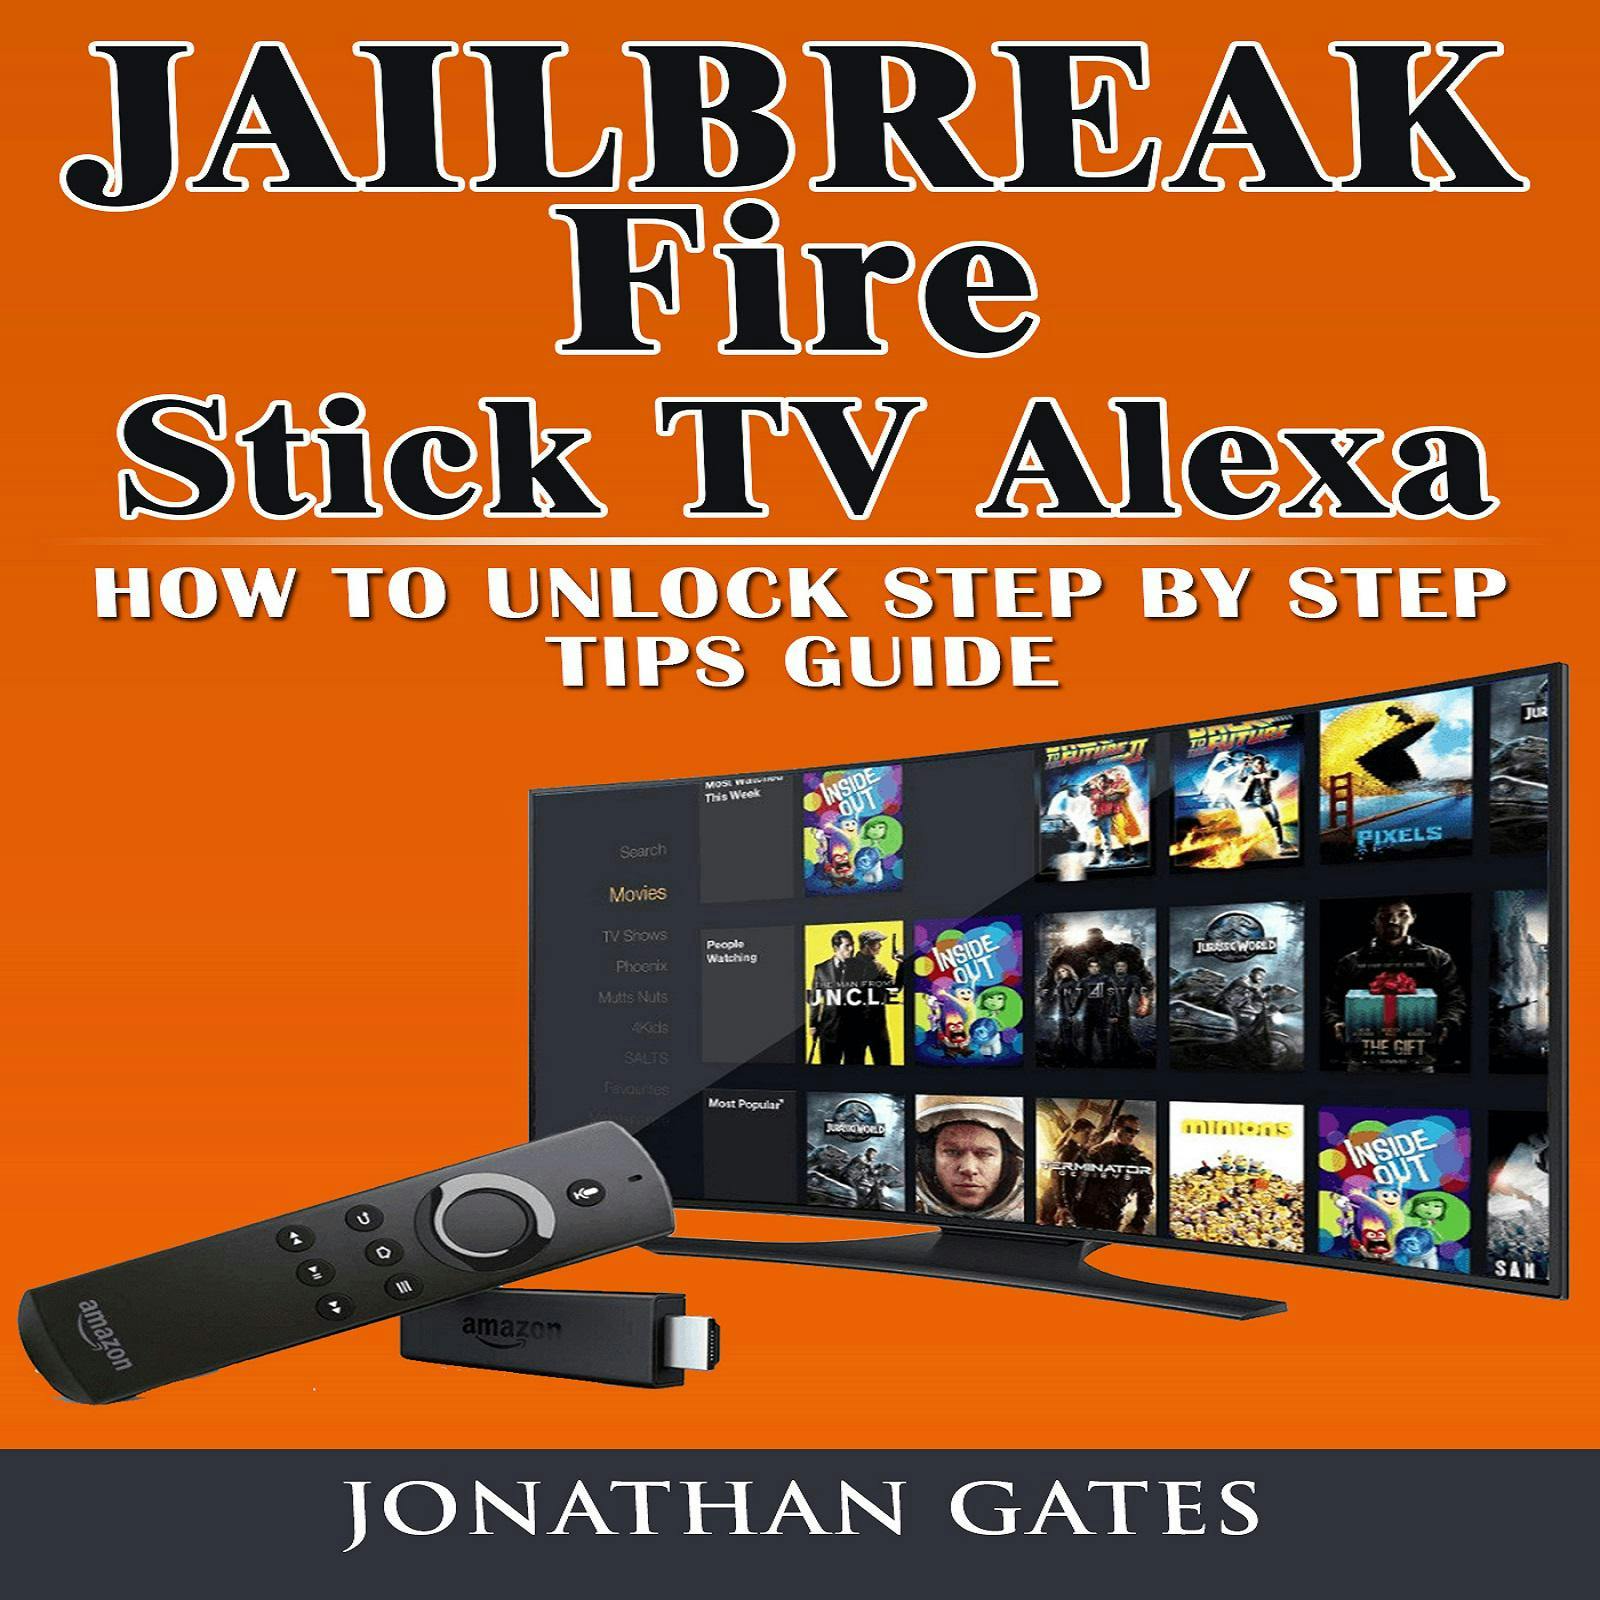 Jailbreak Fire Stick TV Alexa How to Unlock Step by Step Tips Guide - undefined